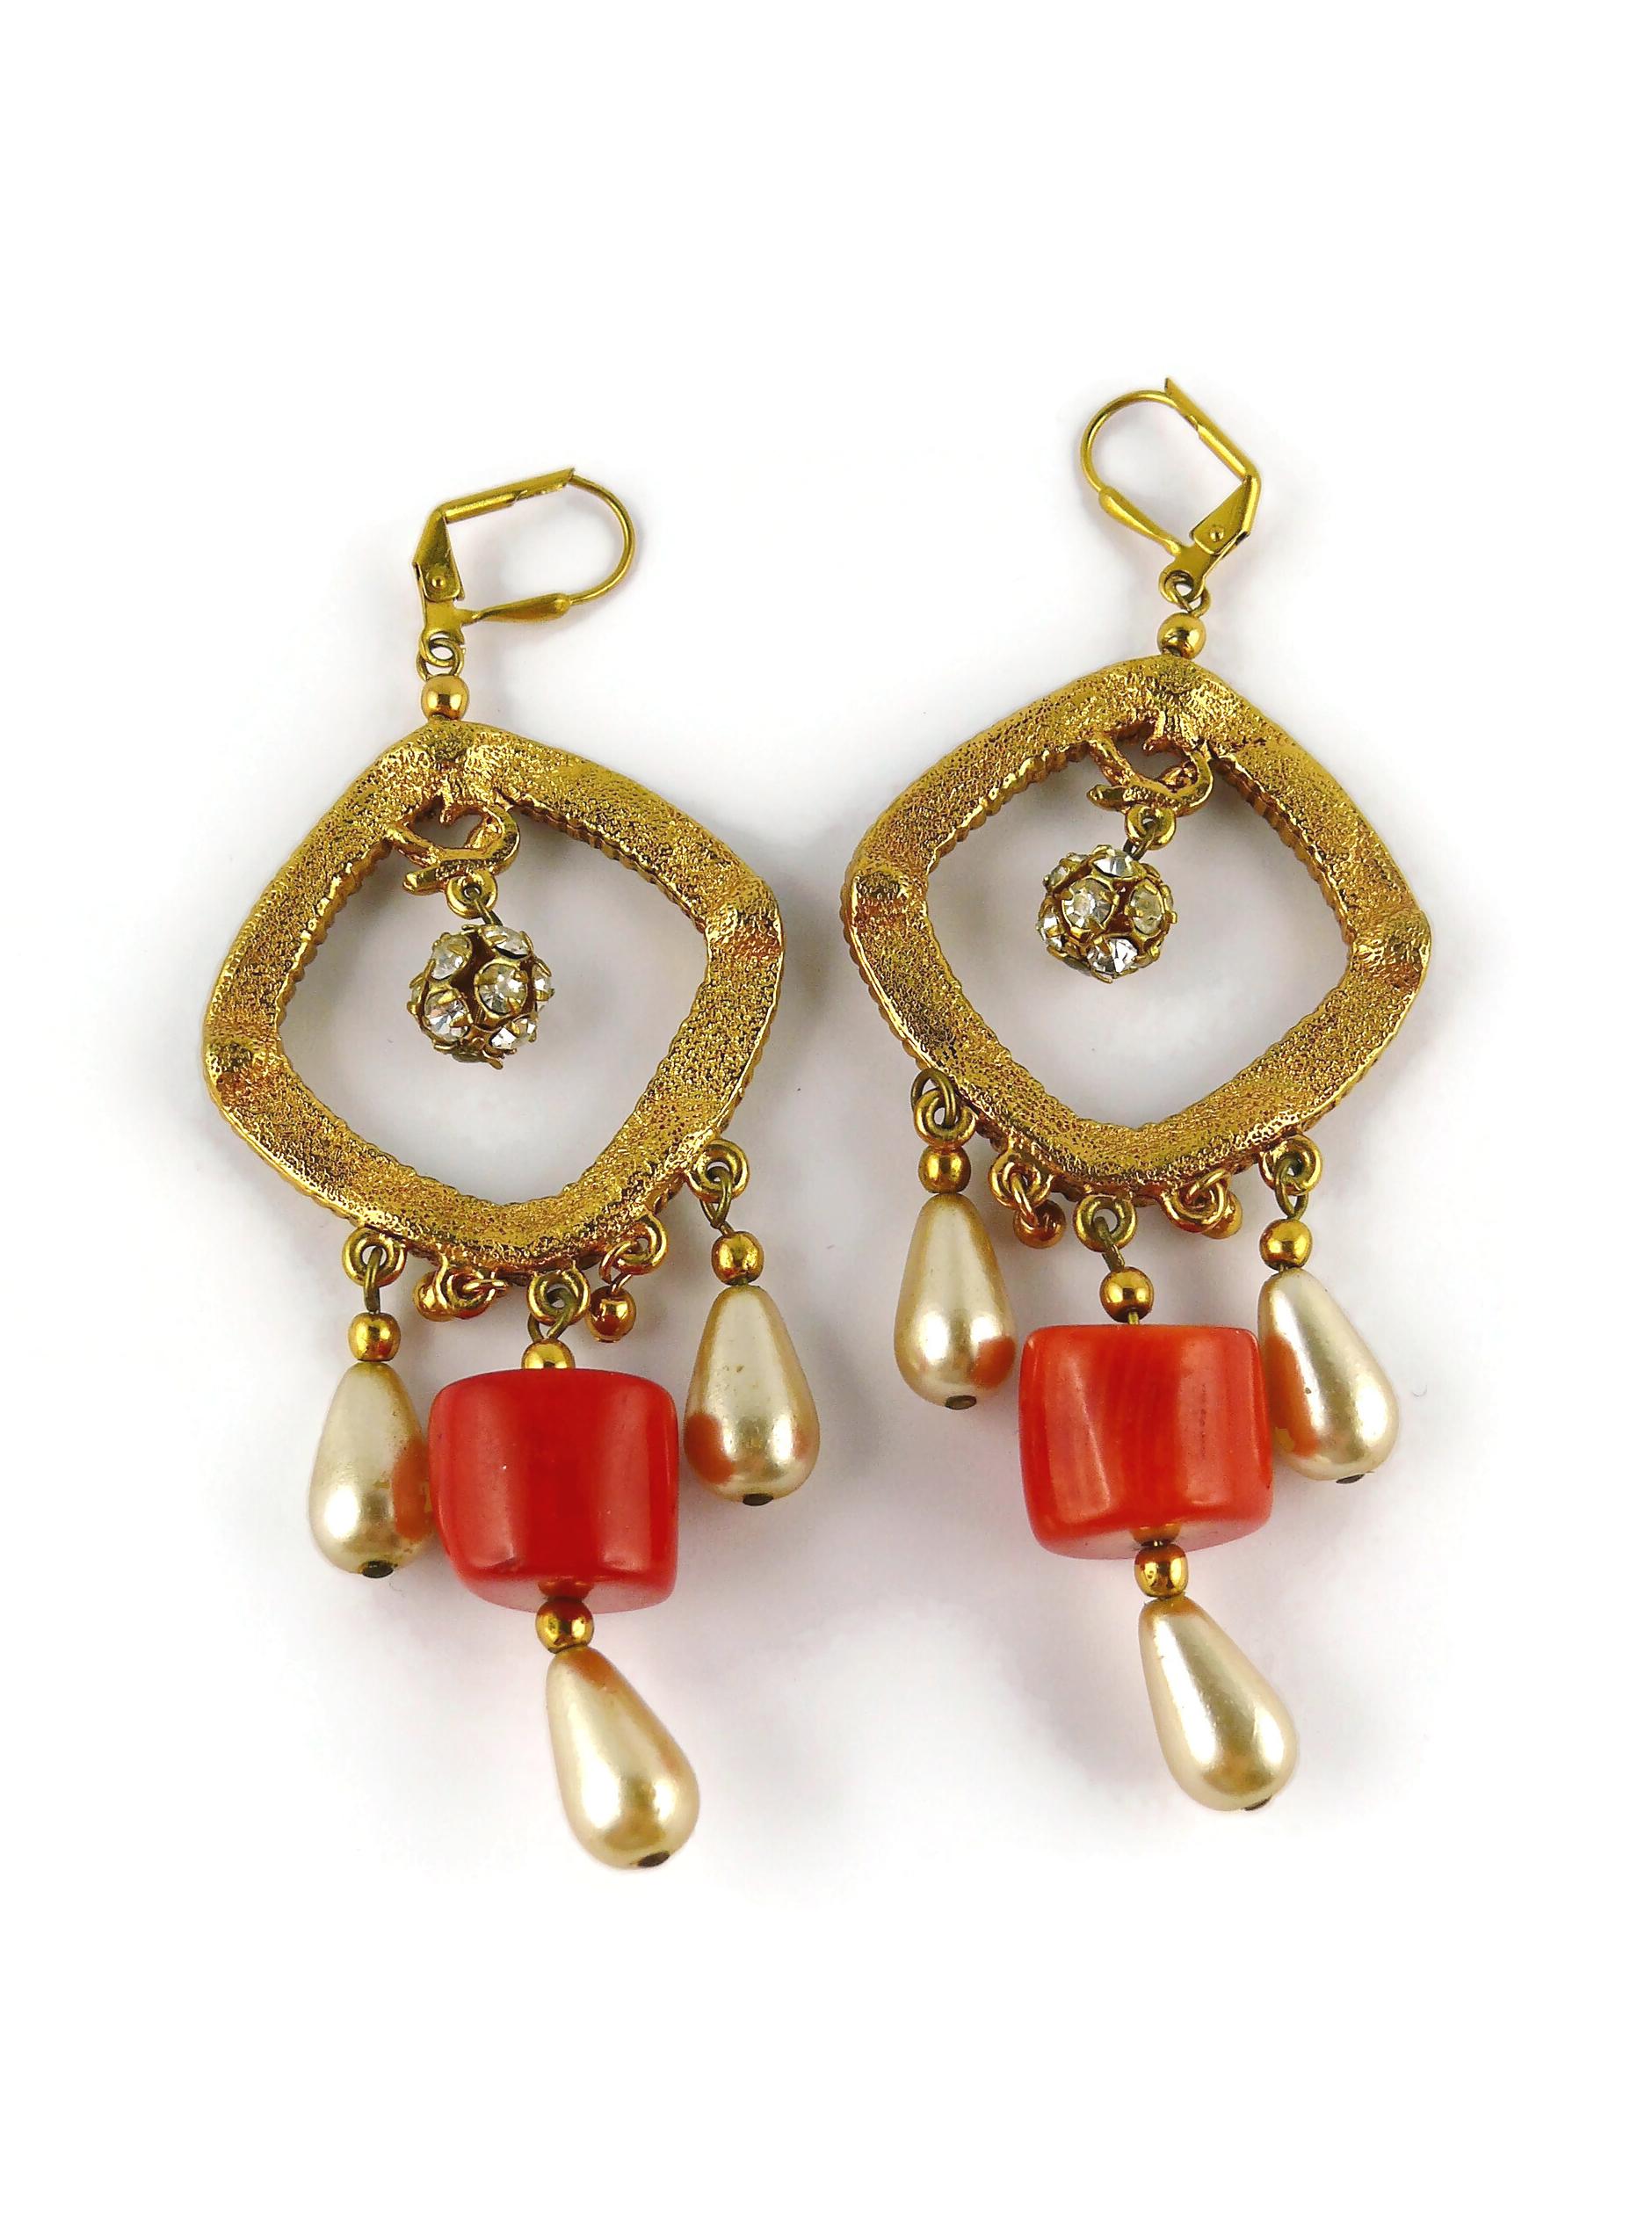 Christian Lacroix Vintage Jewelled Dangling Earrings For Sale 7